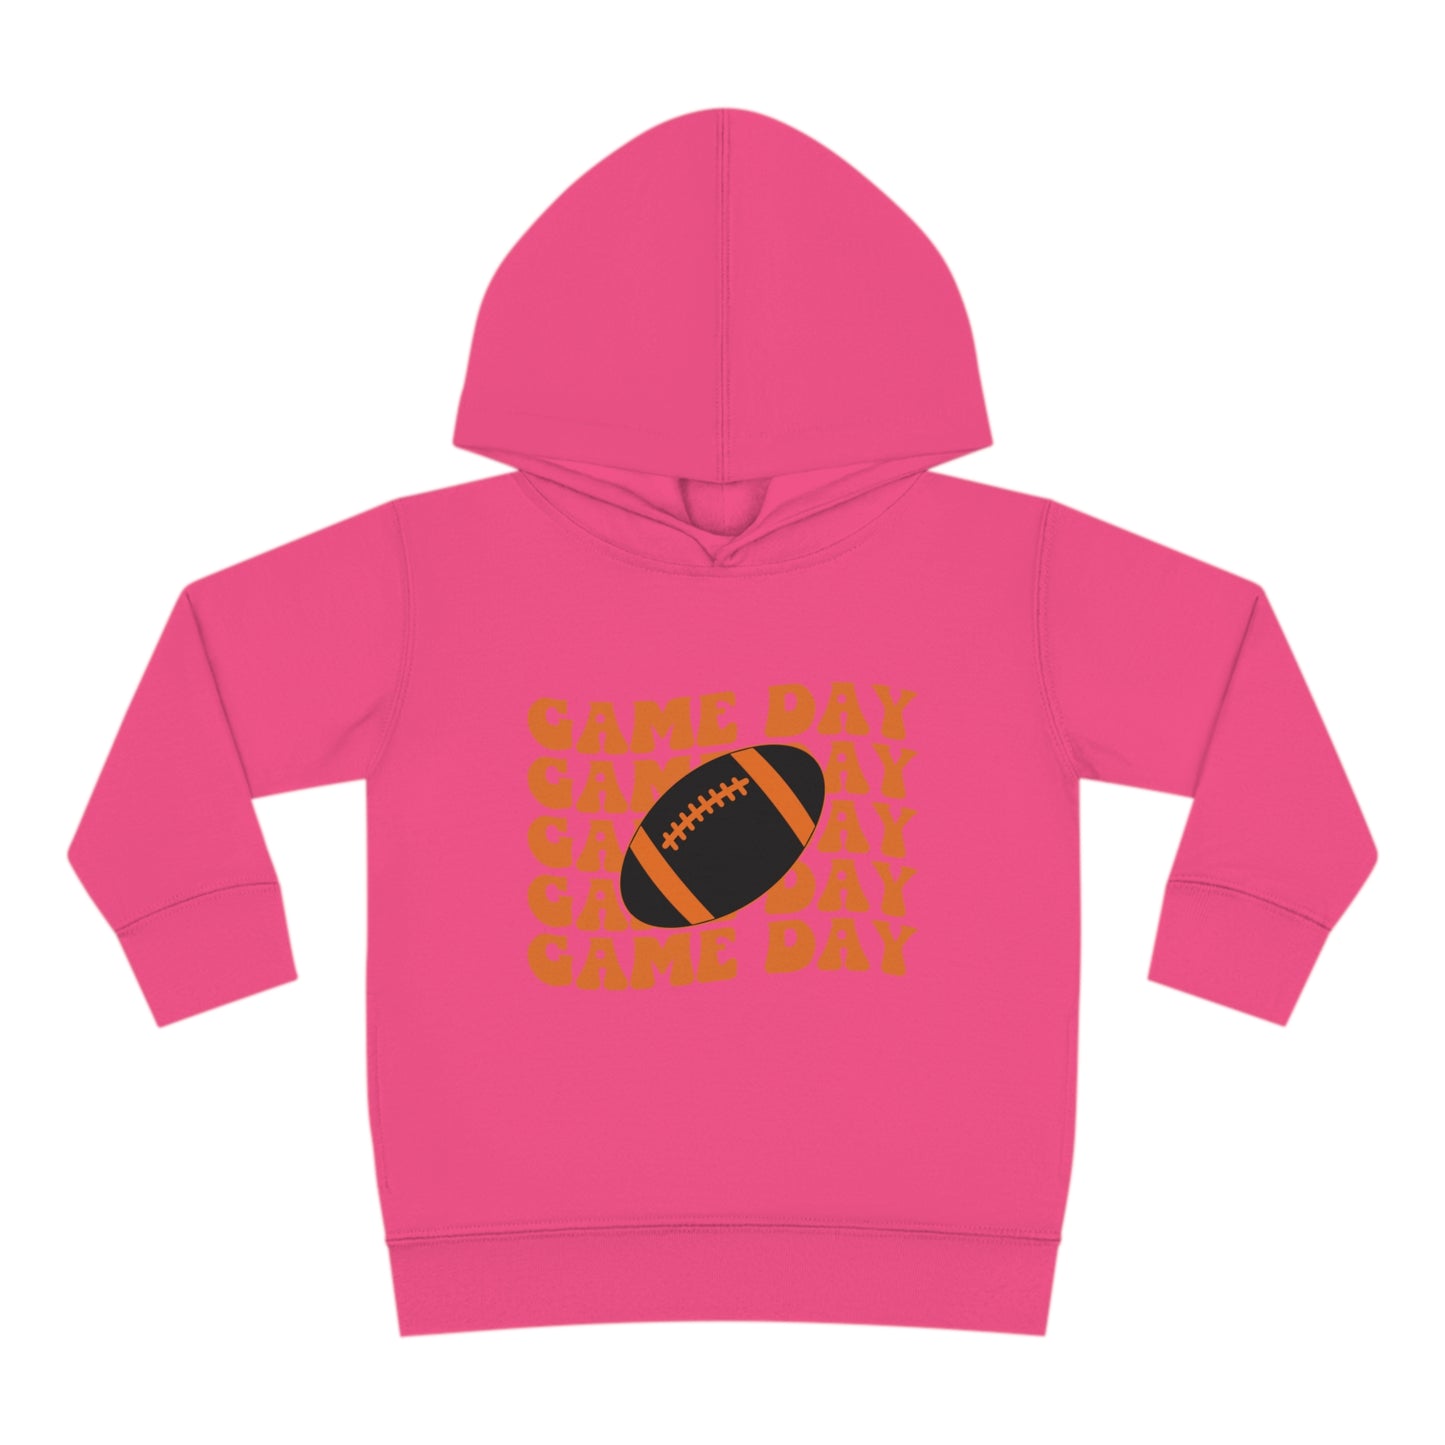 Game Day Football Toddler Pullover Fleece Hoodie